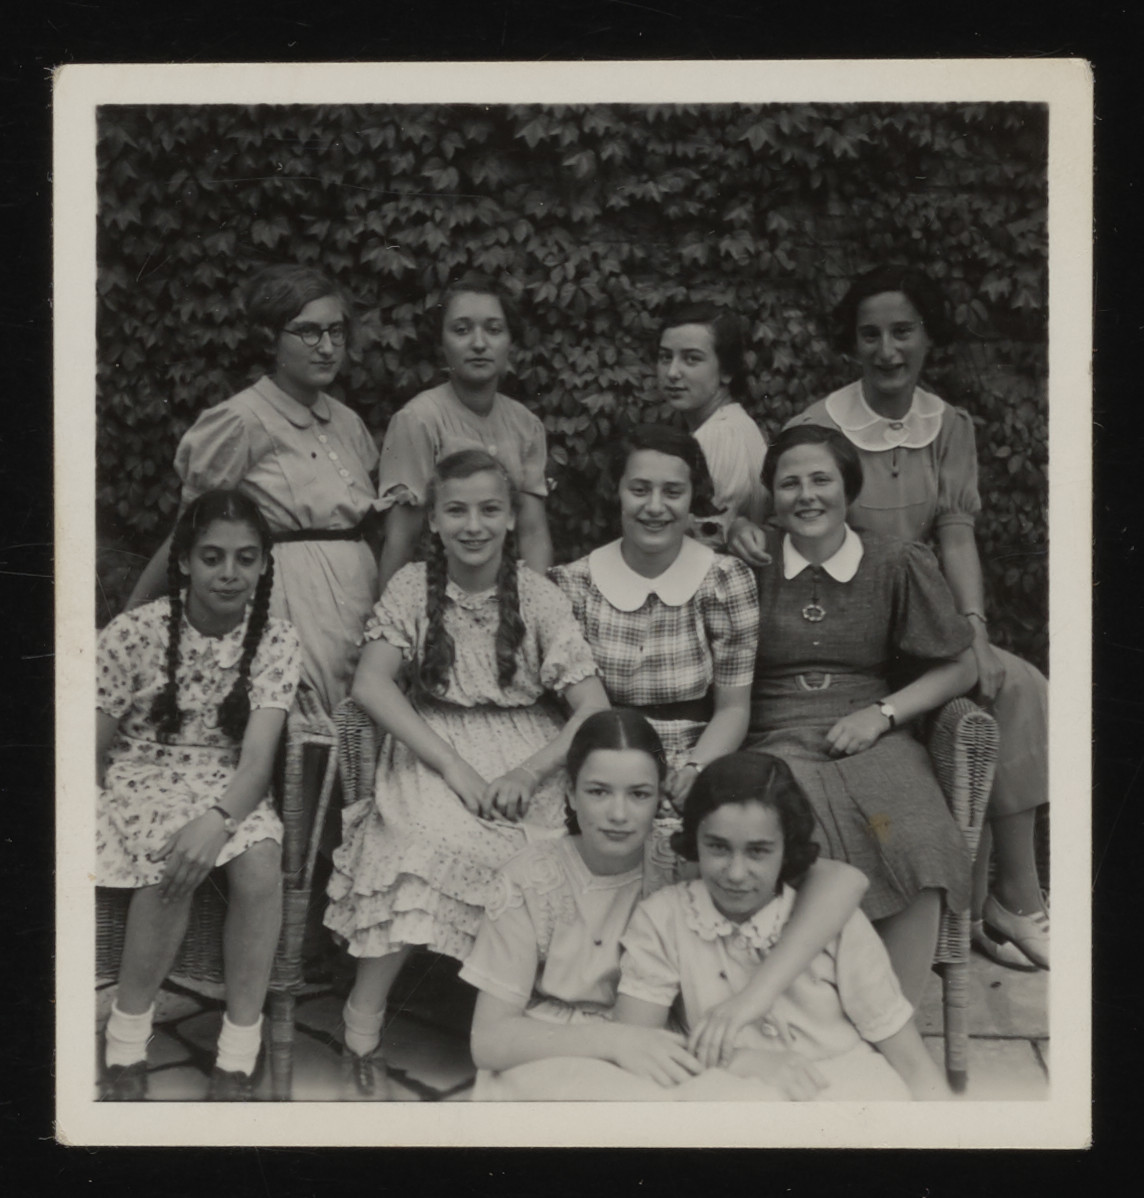 Girls from the Lenore Goldschmidt School celebrate the birthday of [first name unidentified] Schlesinger.

Among those pictured is Gertrud Goldschmidt (donor), second row, second from the left.  Also pictured on the top row is Hannelore Philipsohn who escaped to Sweden.